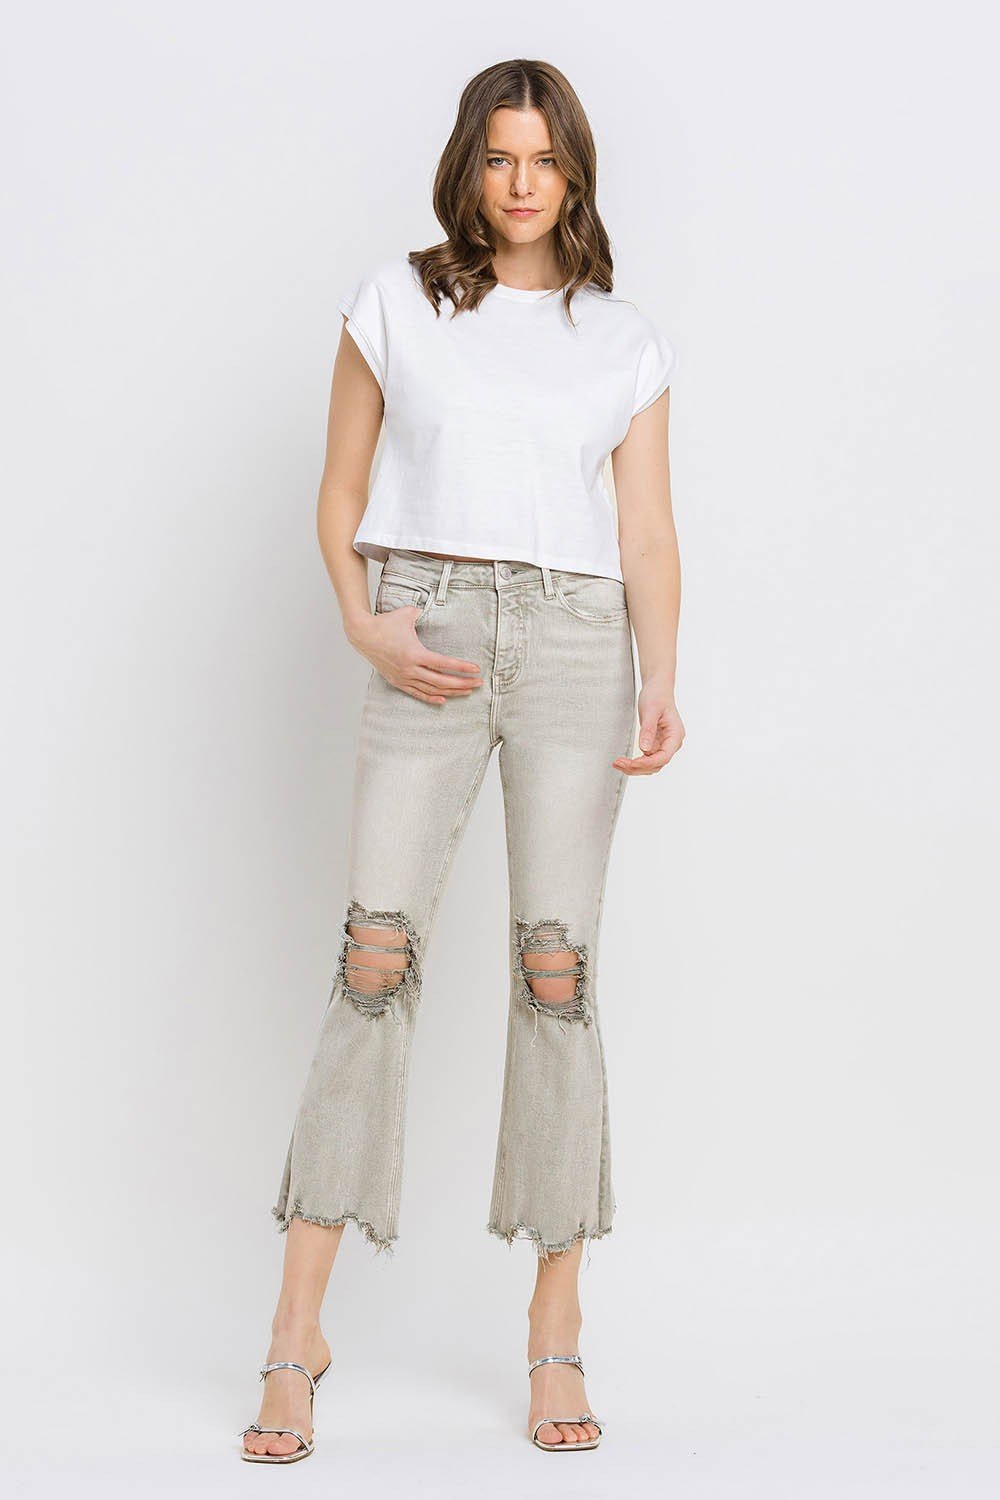 Distressed Raw Hem Cropped Flare Jeans in Moss GreenJeansLovervet